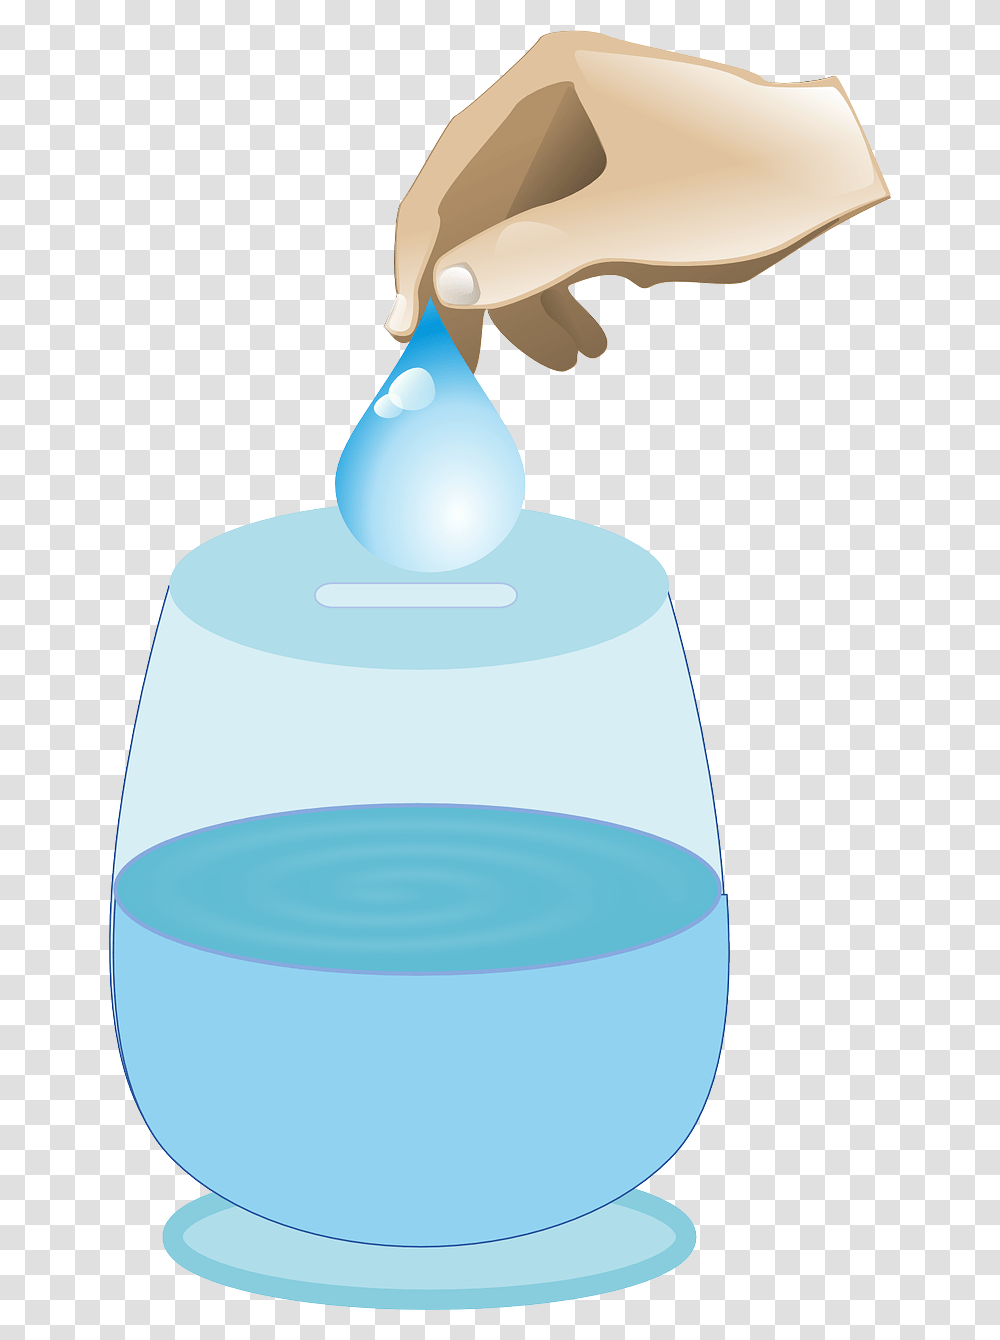 Slogan On Water Conservation, Lamp, Glass, Wine Glass, Alcohol Transparent Png